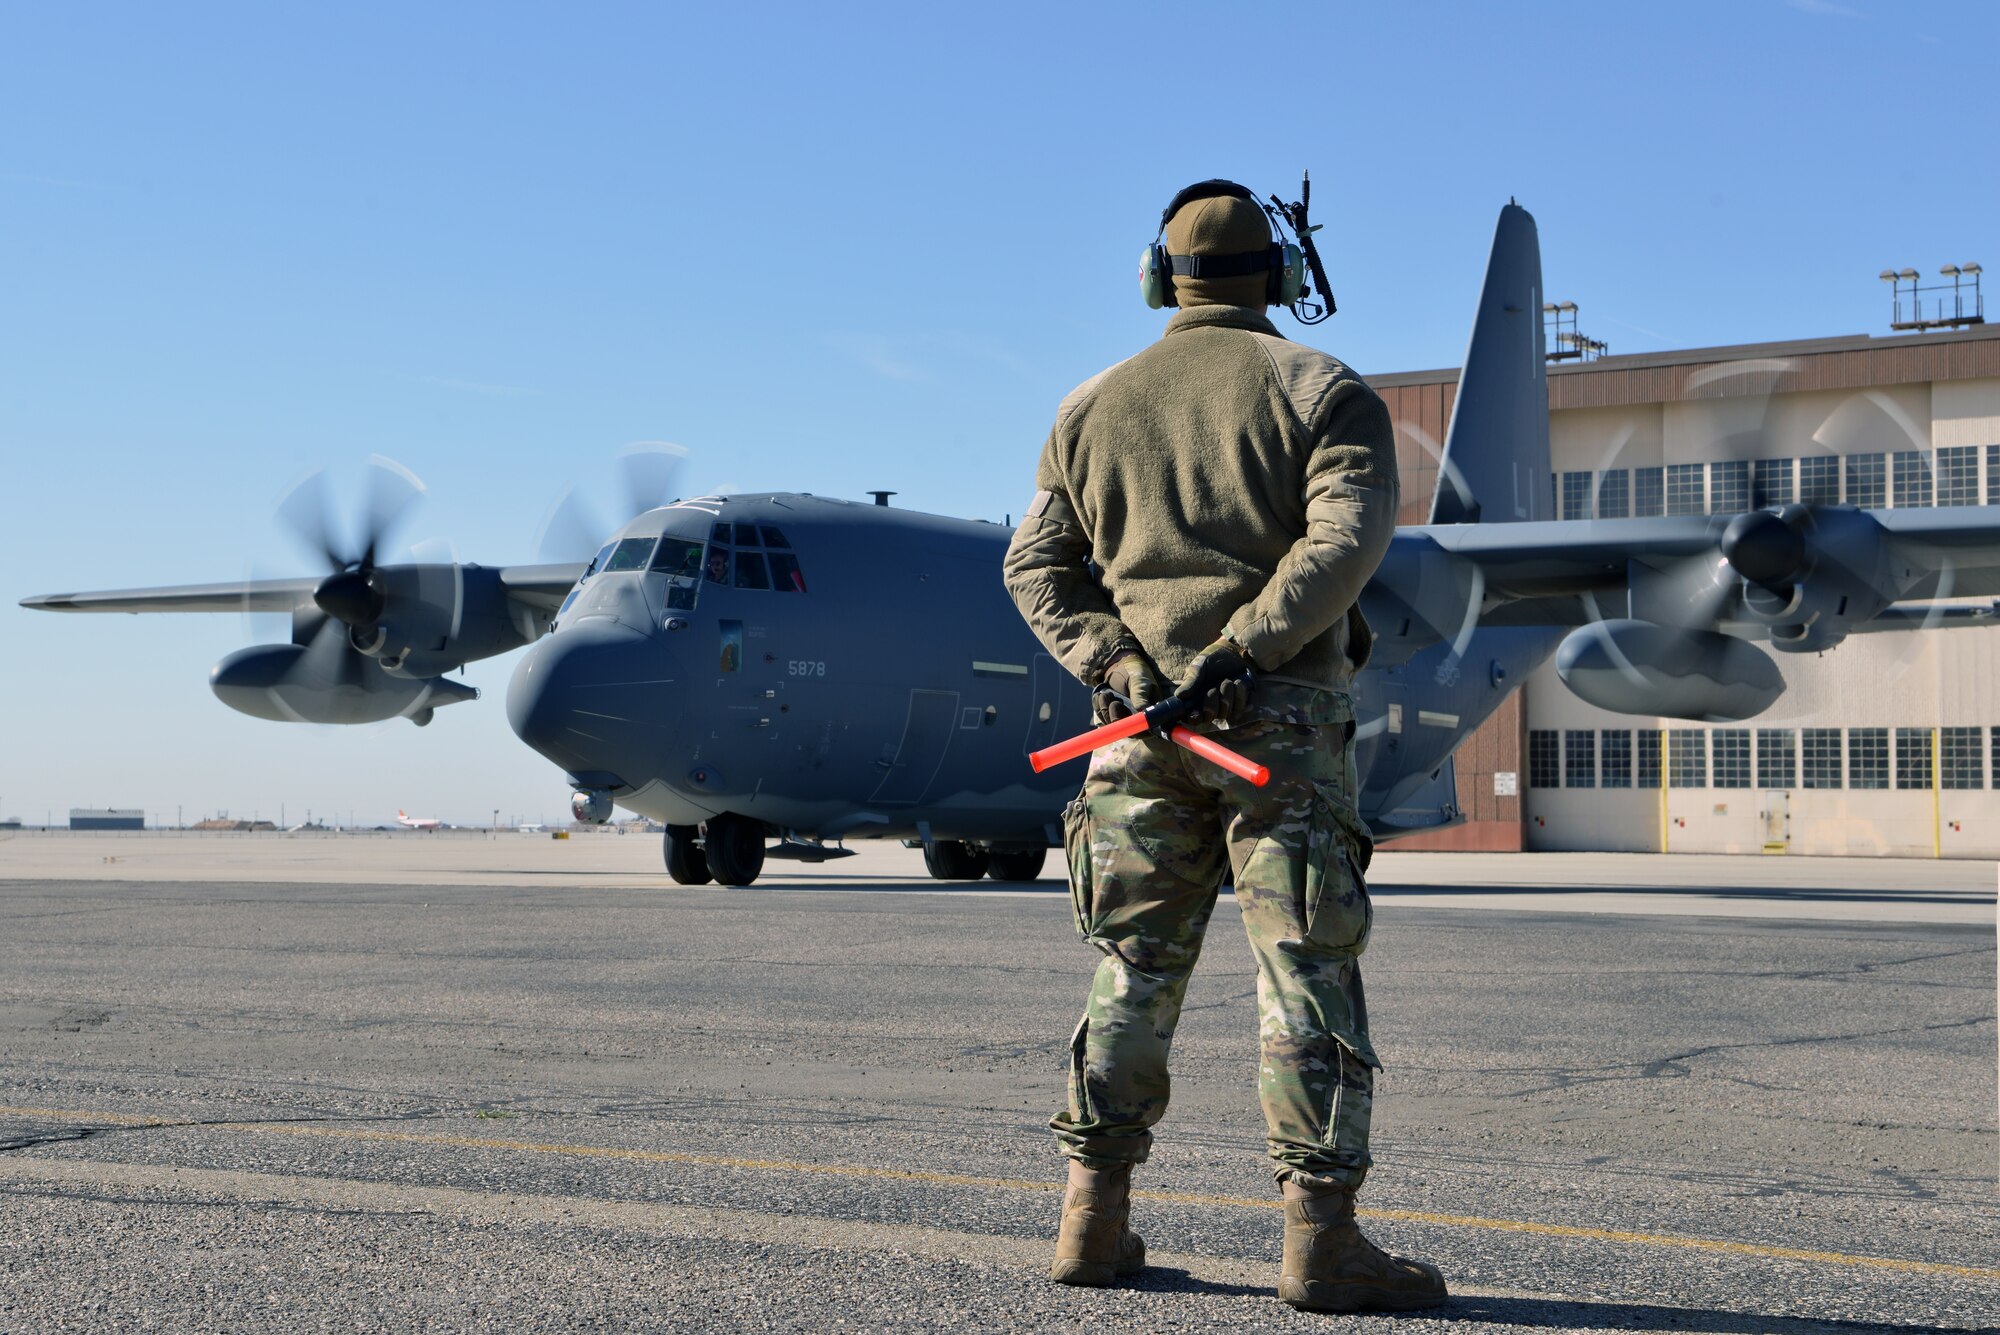 U.S. Air Force Airman 1st Class Paul Hinkle, 415th Aircraft Maintenance Unit crew chief, waits for the pilots of a MC-130J Commando II to complete preflight checks on the flight line at Kirtland Air Force Base, N.M., Nov. 14, 2019.  The 415th AMU is responsible for all maintenance on the MC-130J Commando II and HC-130J Combat King II aircraft assigned to keep them mission ready for the 415th Special Operation Squadron. (U.S. Air Force photo by Staff Sgt. Dylan Nuckolls)